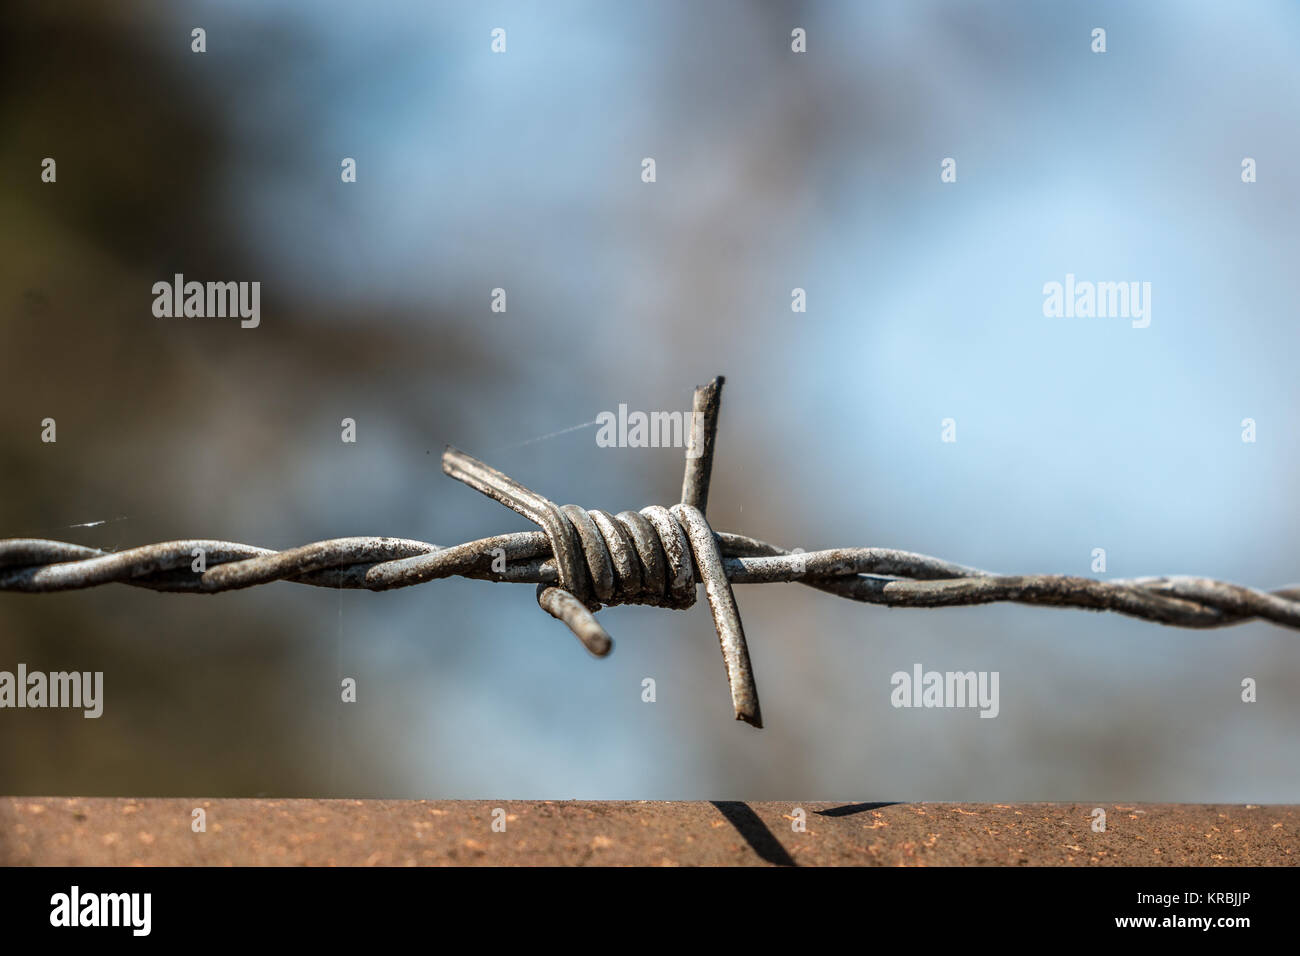 Barbed wire fence made of steel for protection Stock Photo